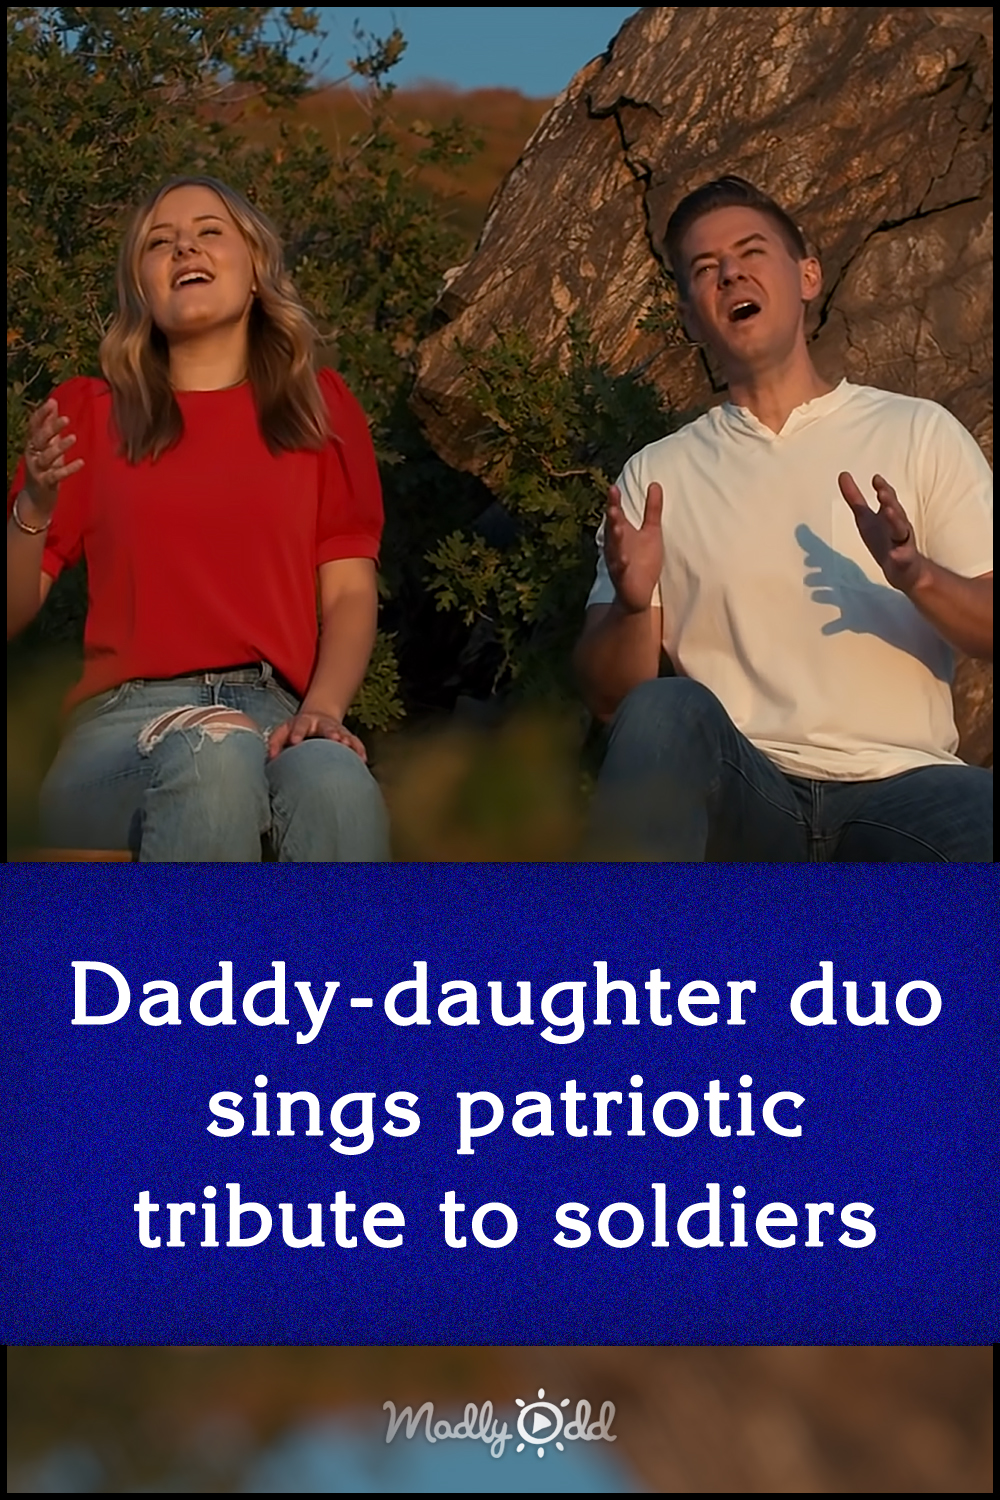 Daddy-daughter duo sings patriotic tribute to soldiers